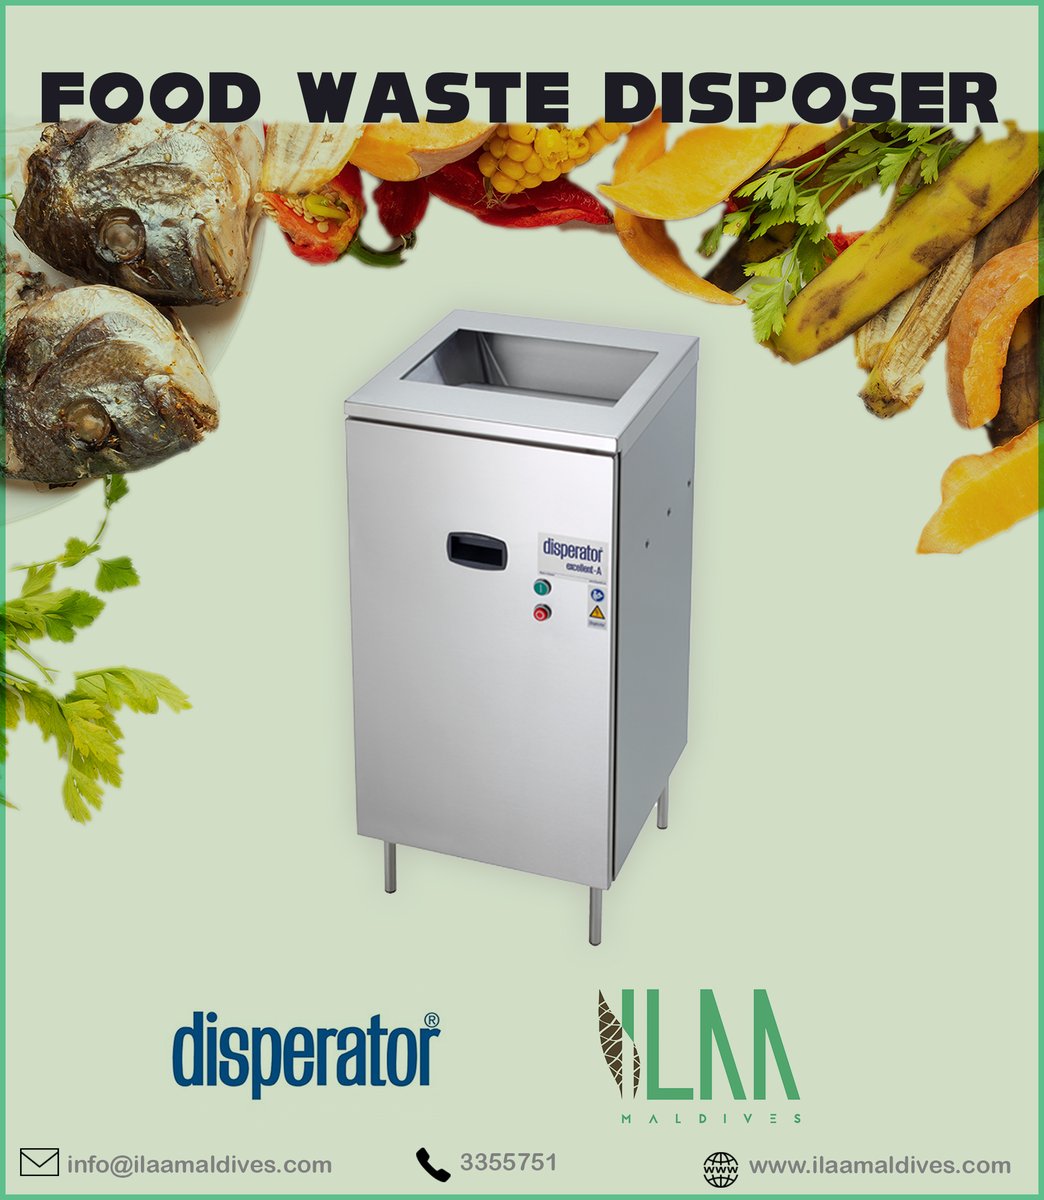 Food Waste Disposer from Disperator can be completely adapted to your kitchen or to your work environment, regardless of size and layout.
For more info reach us on
T: 3355751
E: info@ilaamaldives.com
W: ilaamaldives.com
#IlaaMaldives #FoodWasteDisposer